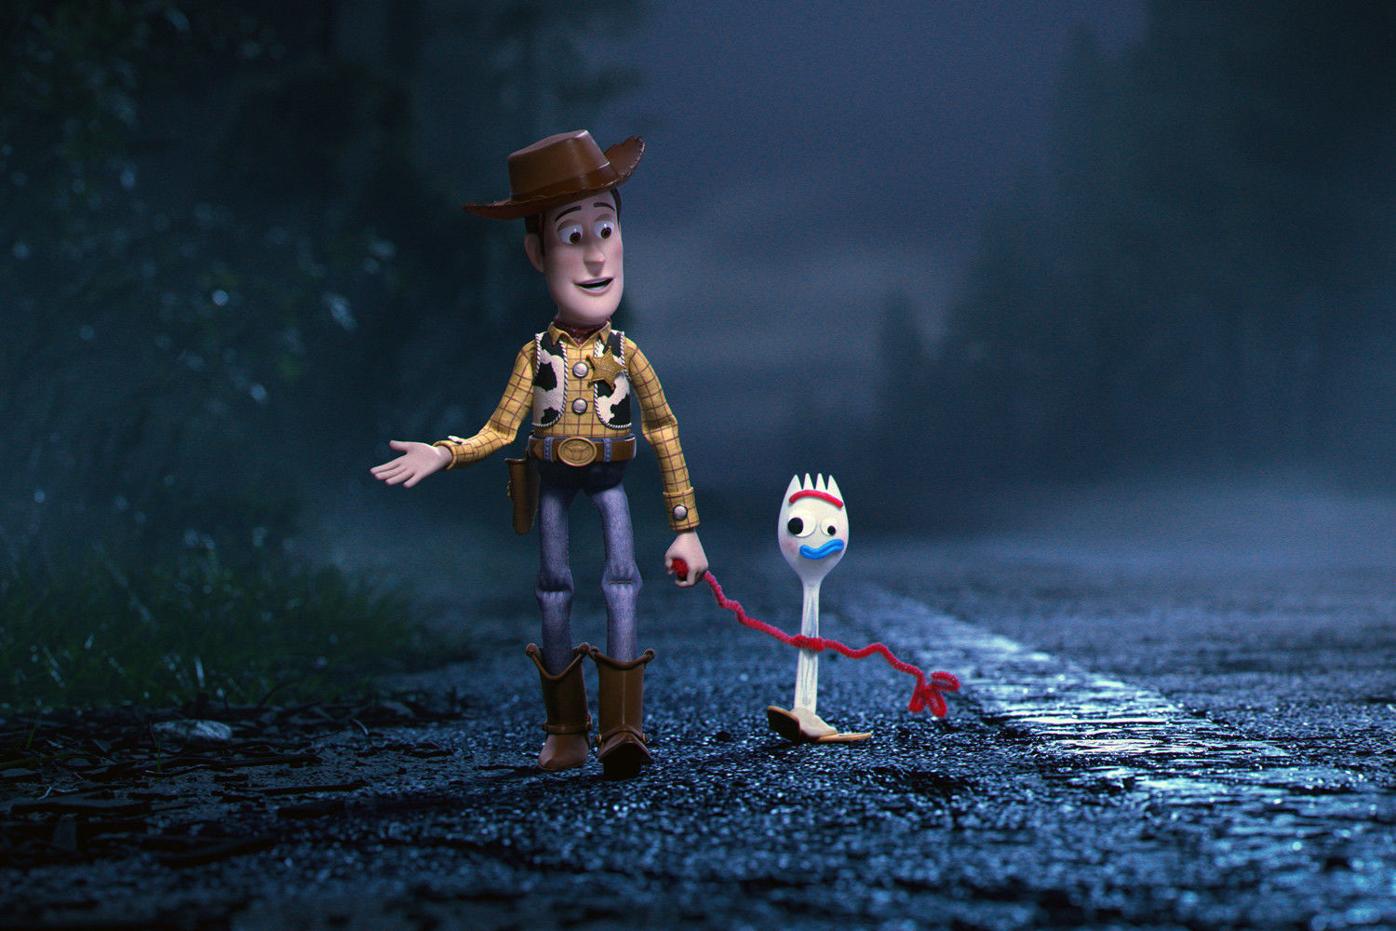 Toy Story 4” and “Wild Rose,” Reviewed